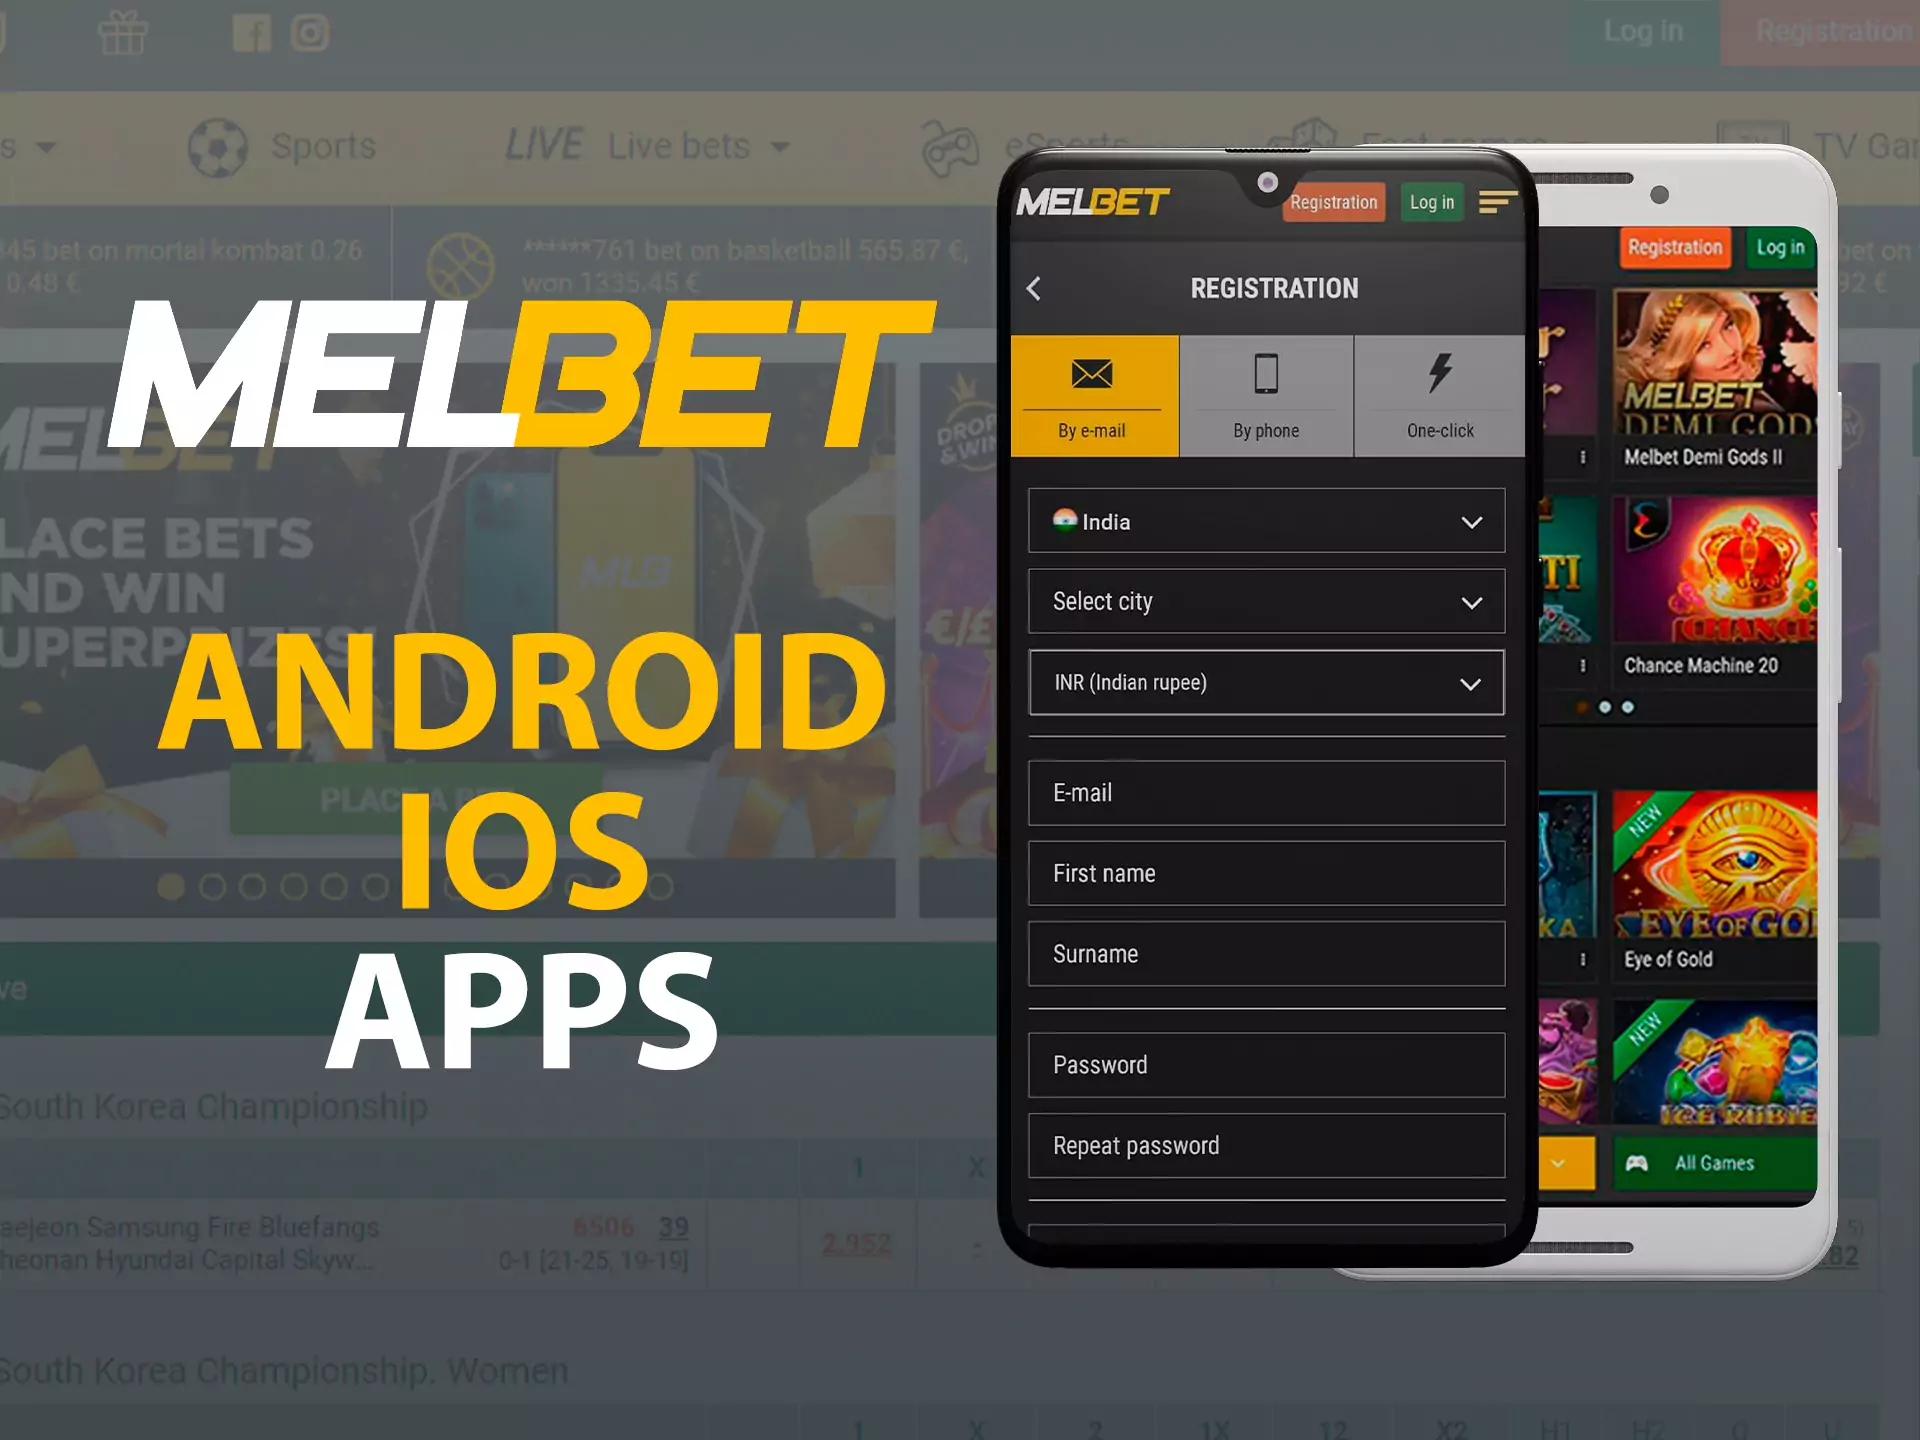 Select the Android or iOS Melbet app to download. Then follow the instructions below.